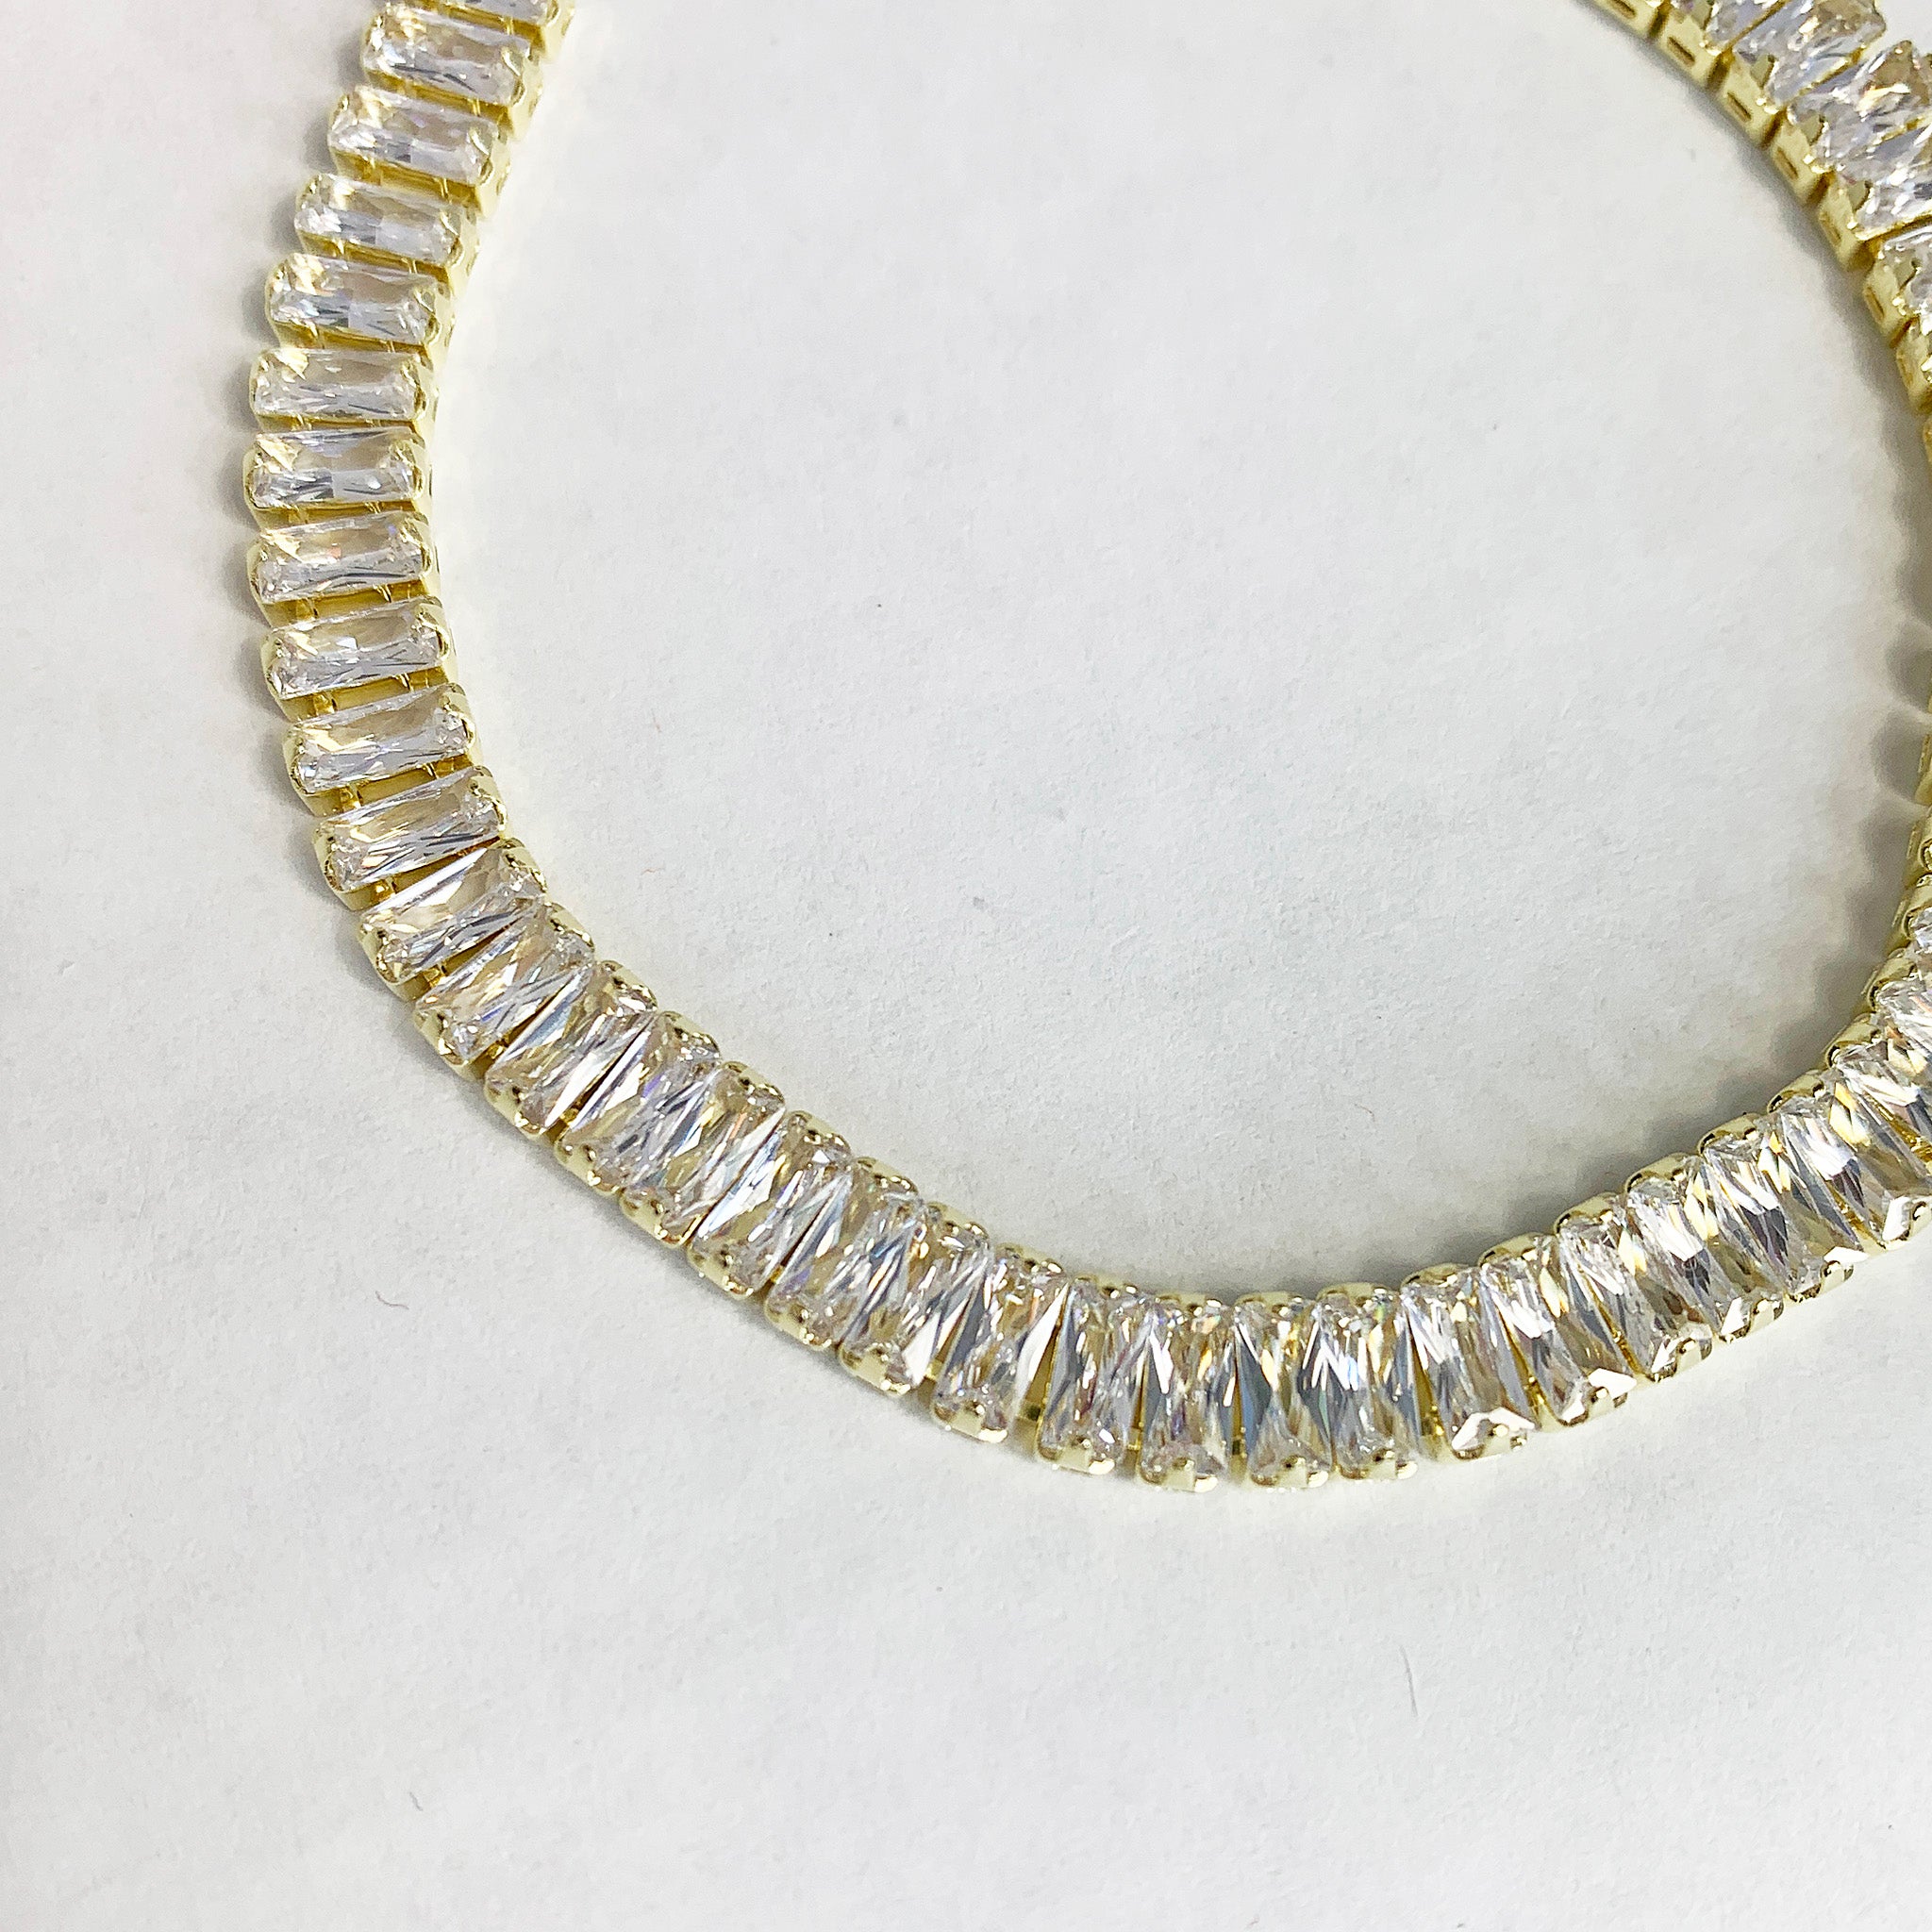 Sheila Fajl Bettina Tennis Bracelet in Clear Cubic Zirconia and Gold Plated